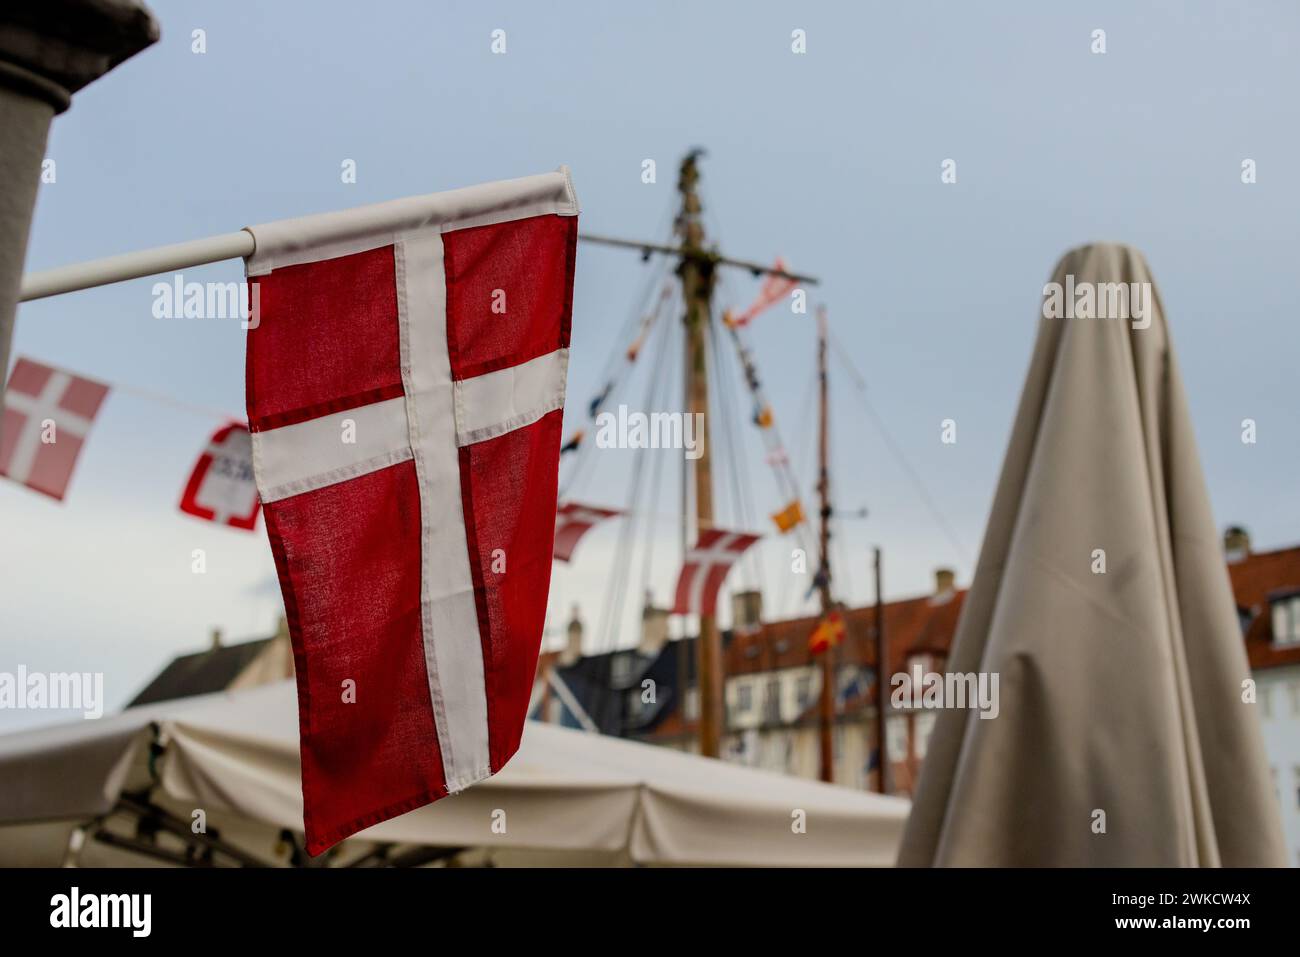 A Danish flag hanging at a boat dock. Stock Photo